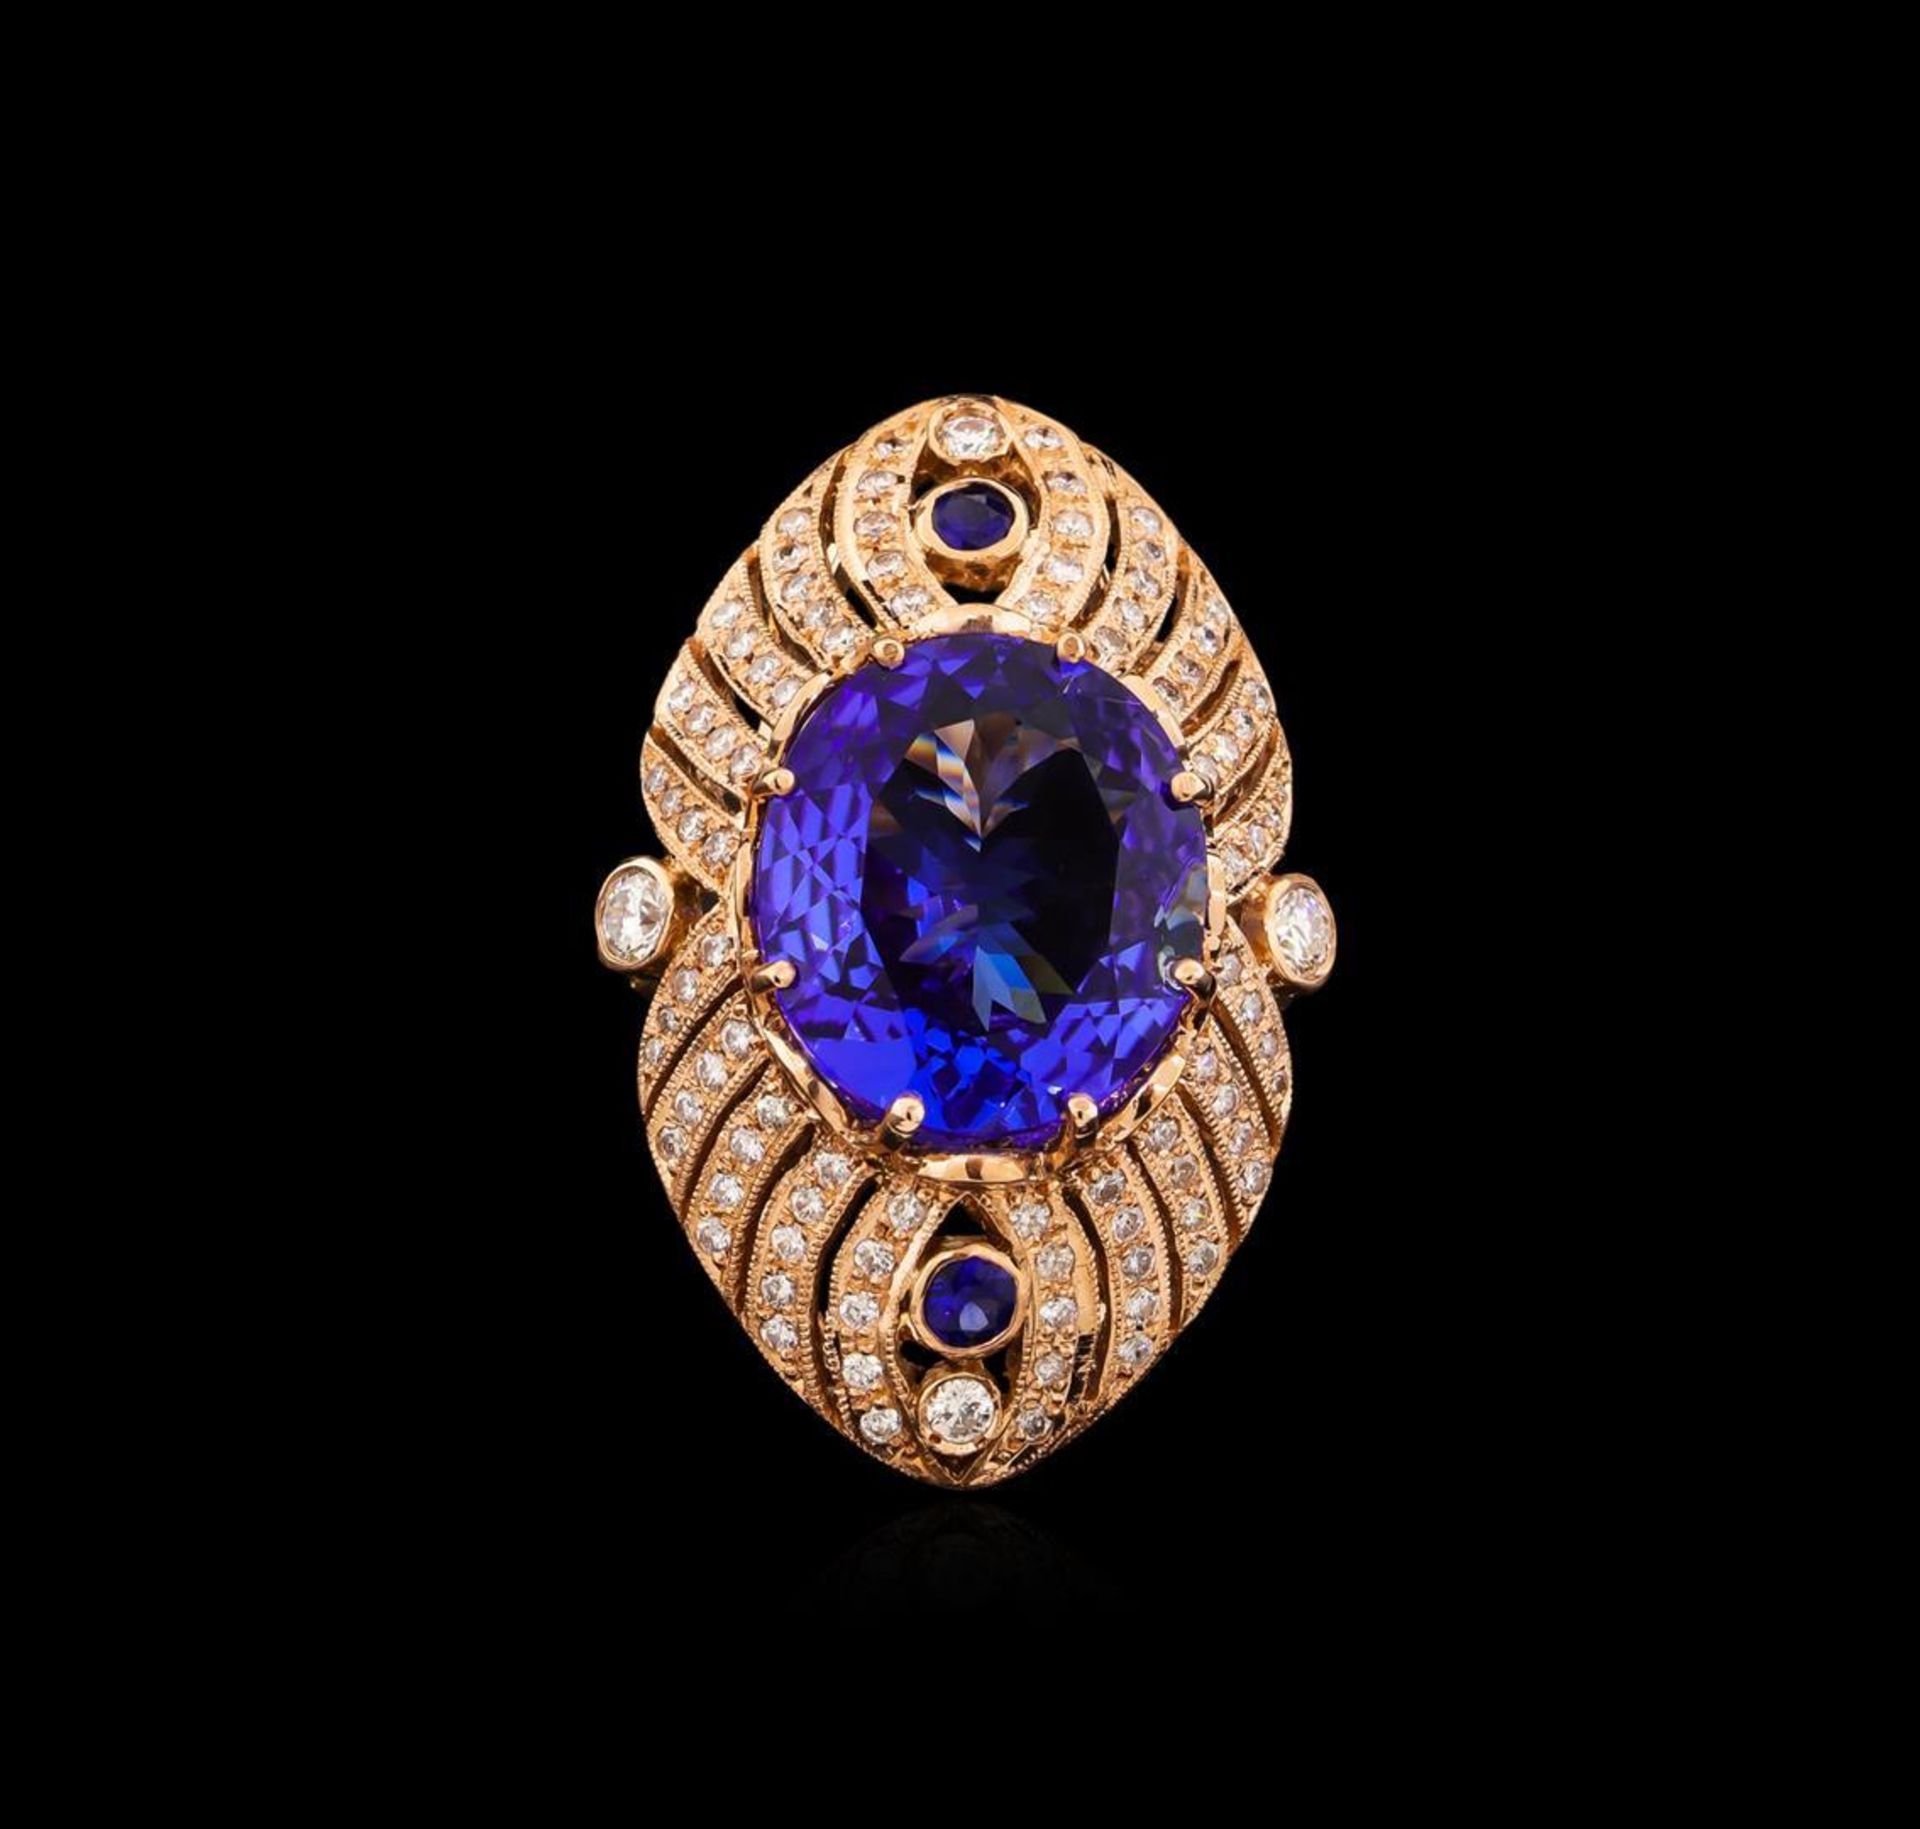 15.02 ctw Tanzanite, Sapphire and Diamond Ring - 14KT Rose Gold - Image 2 of 6